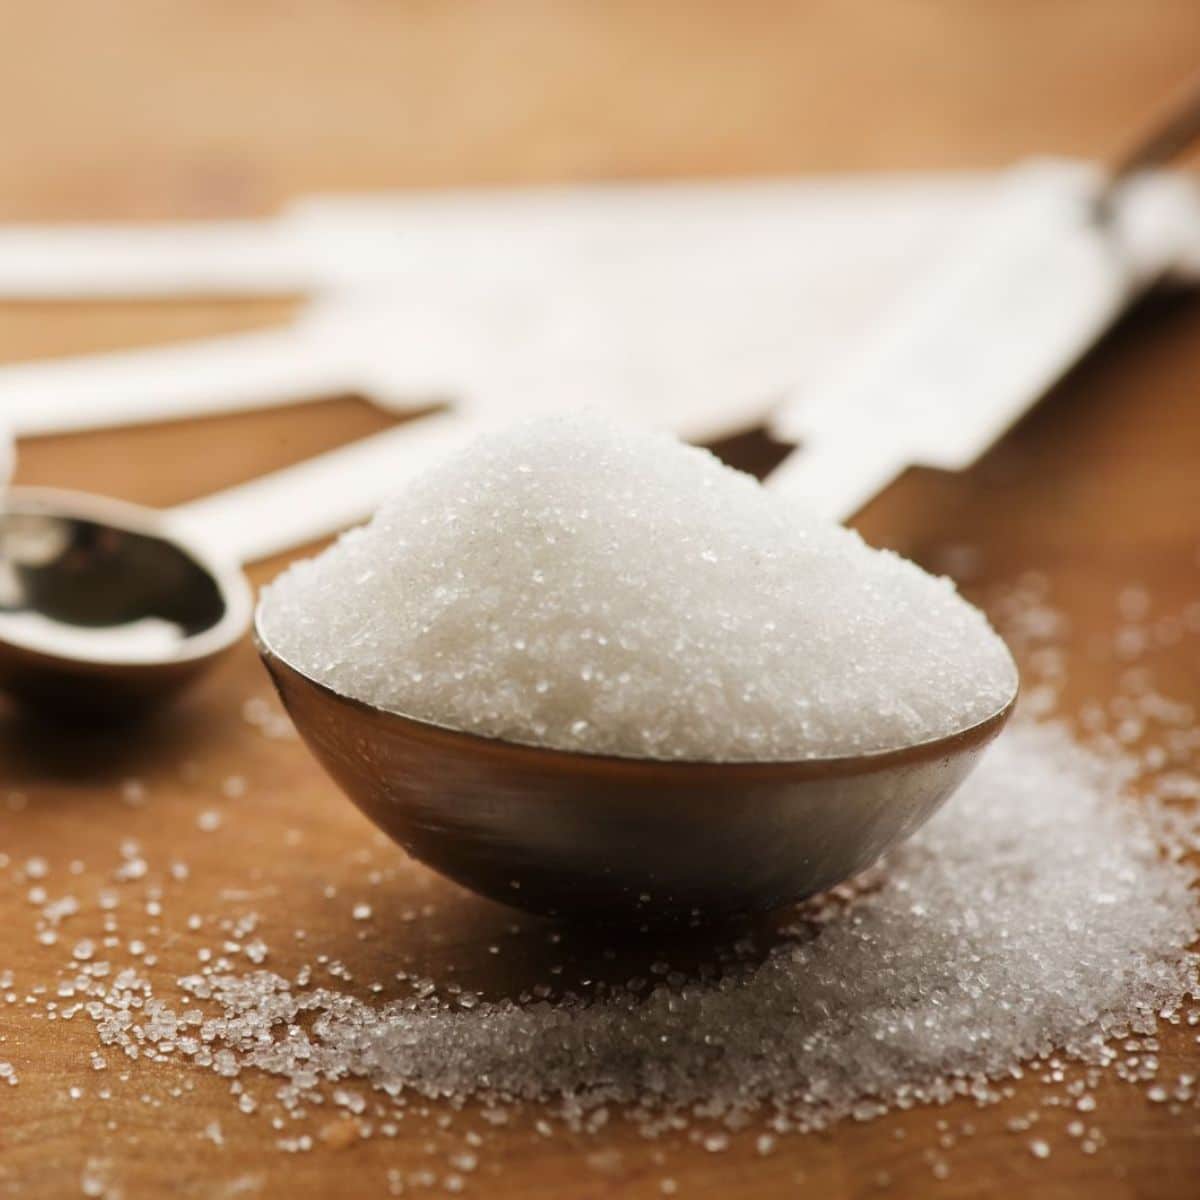 How to convert grams of sugar to tablespoons easily while baking.